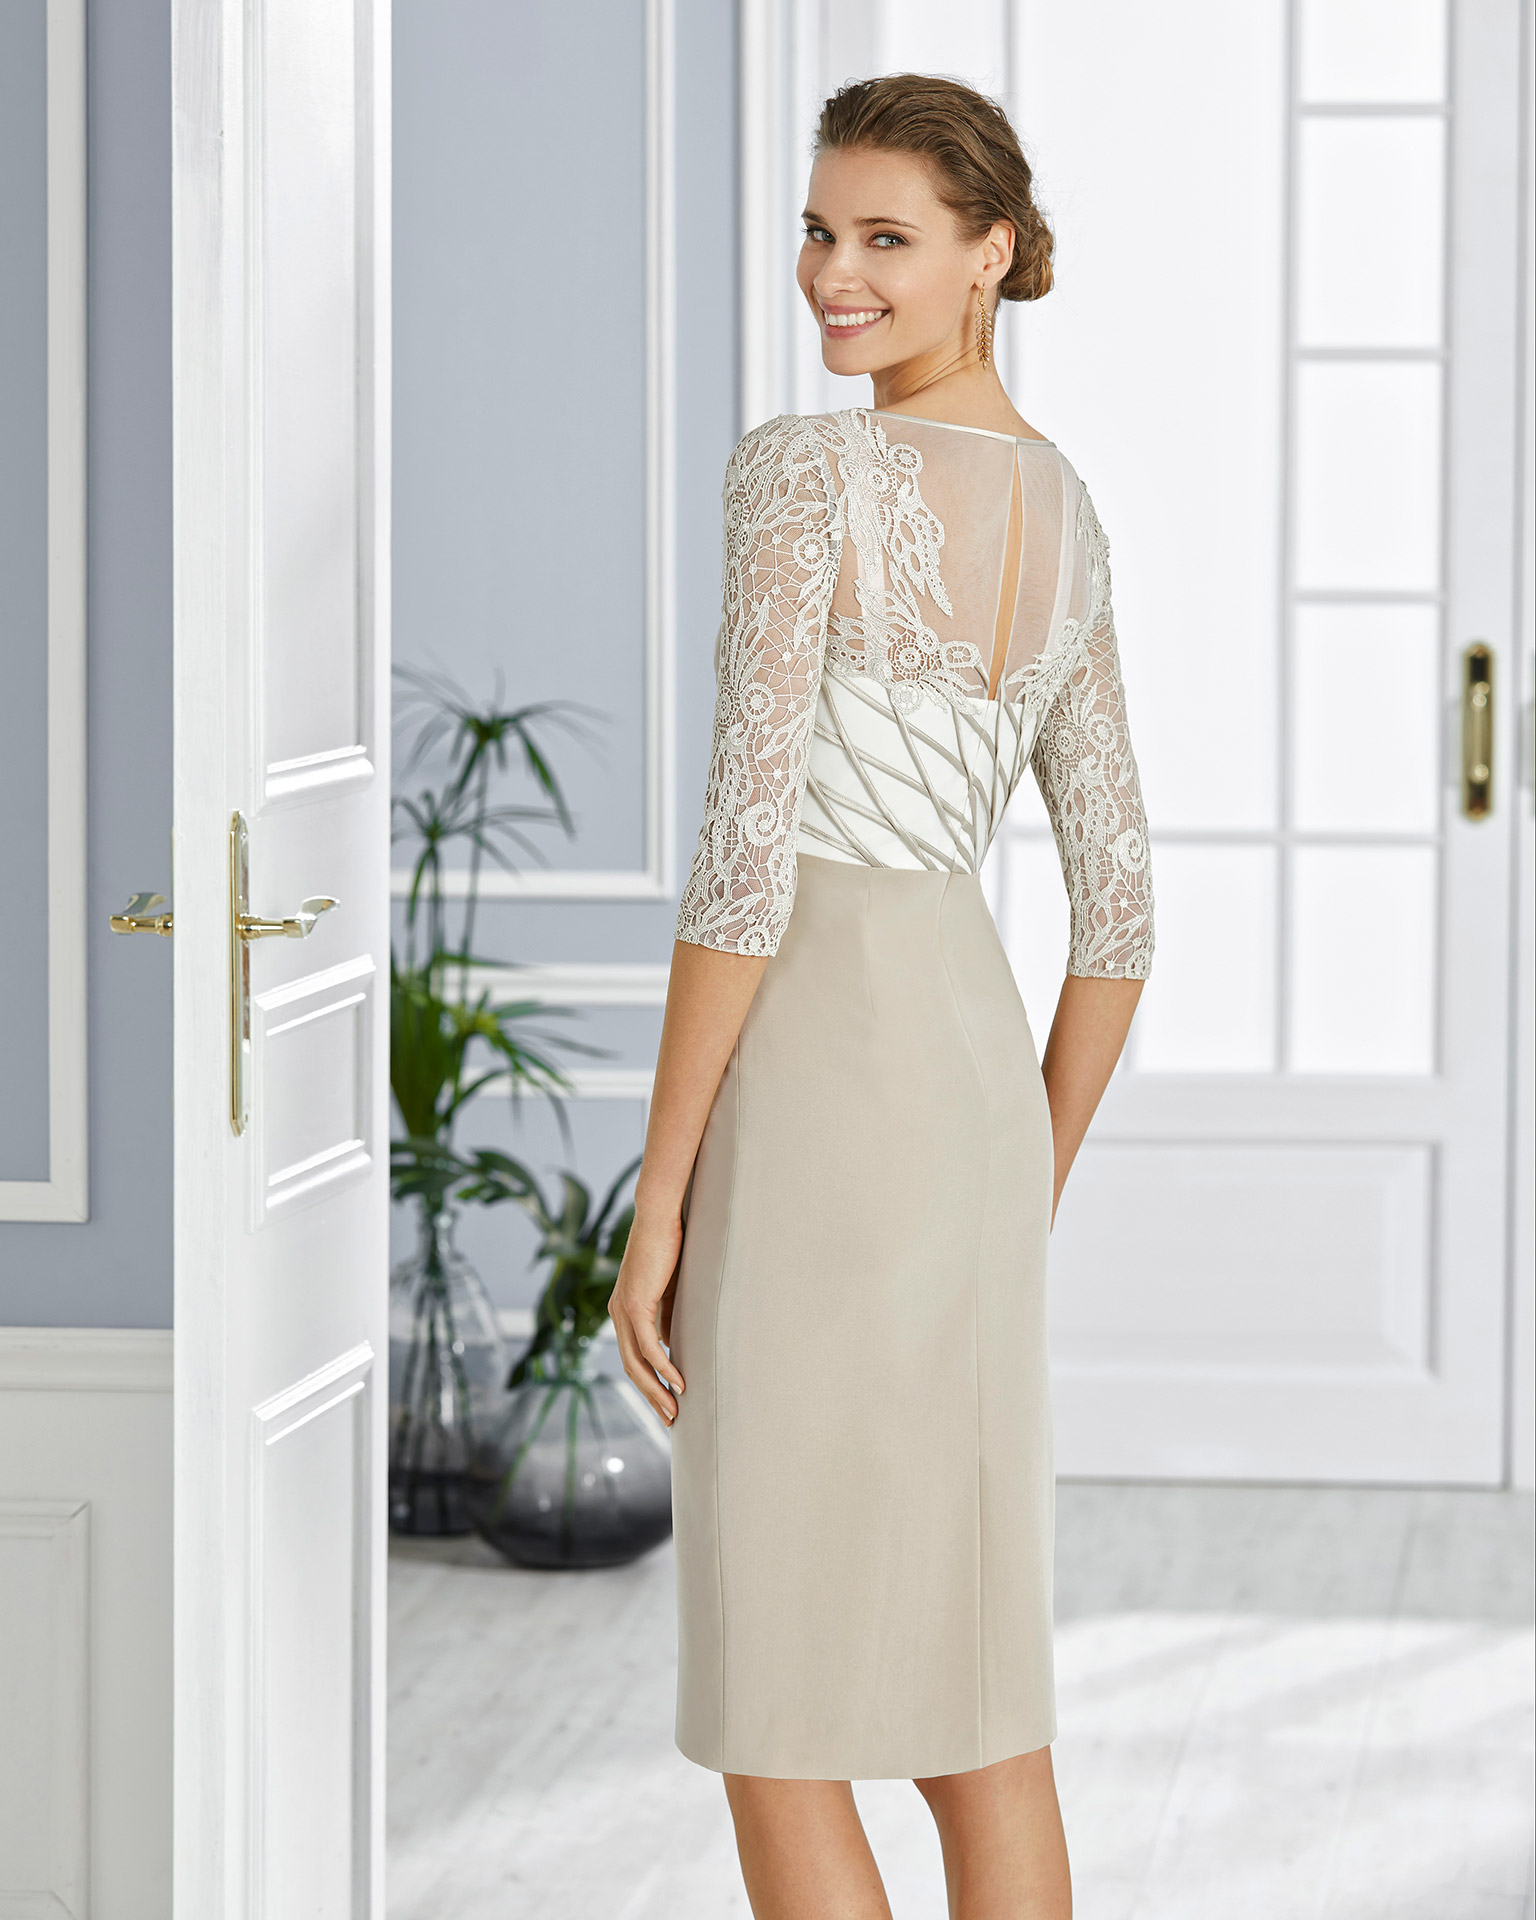 Short cocktail dress in crepe sateen with lace on the bodice. Round neckline with three-quarter sleeves and beaded brooch at the waist. 2020 COUTURE CLUB Collection.